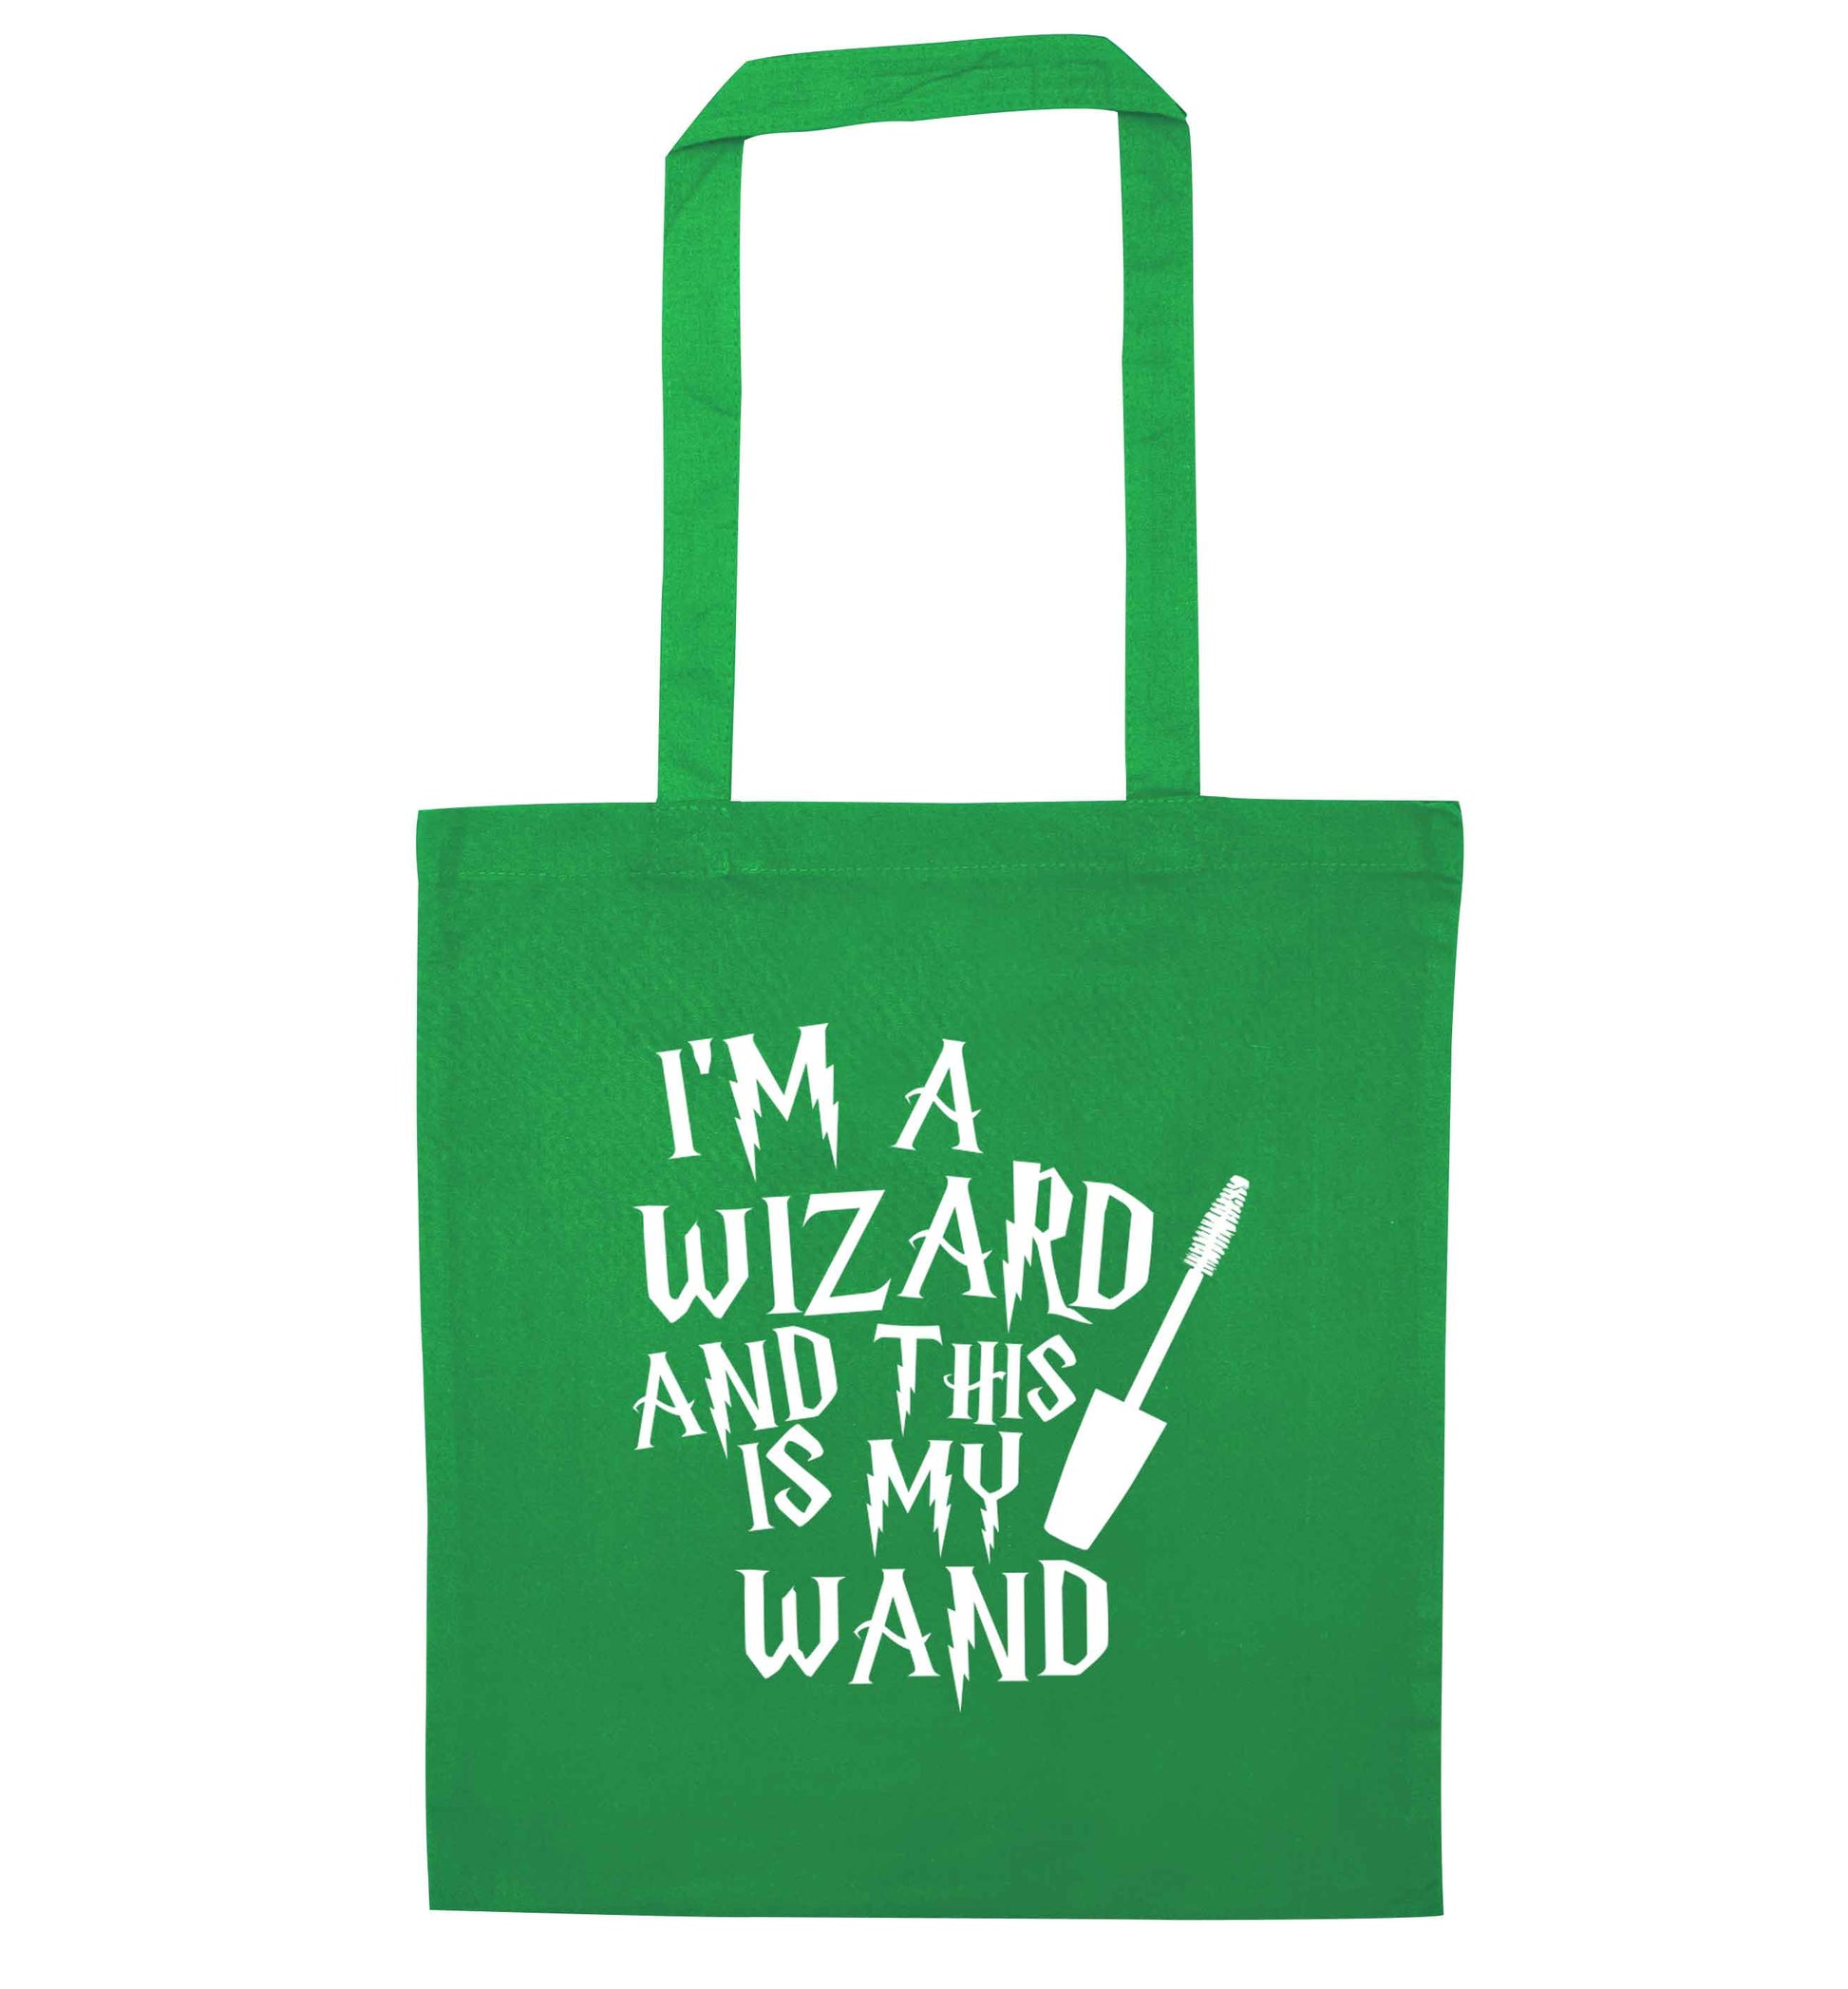 I'm a wizard and this is my wand green tote bag